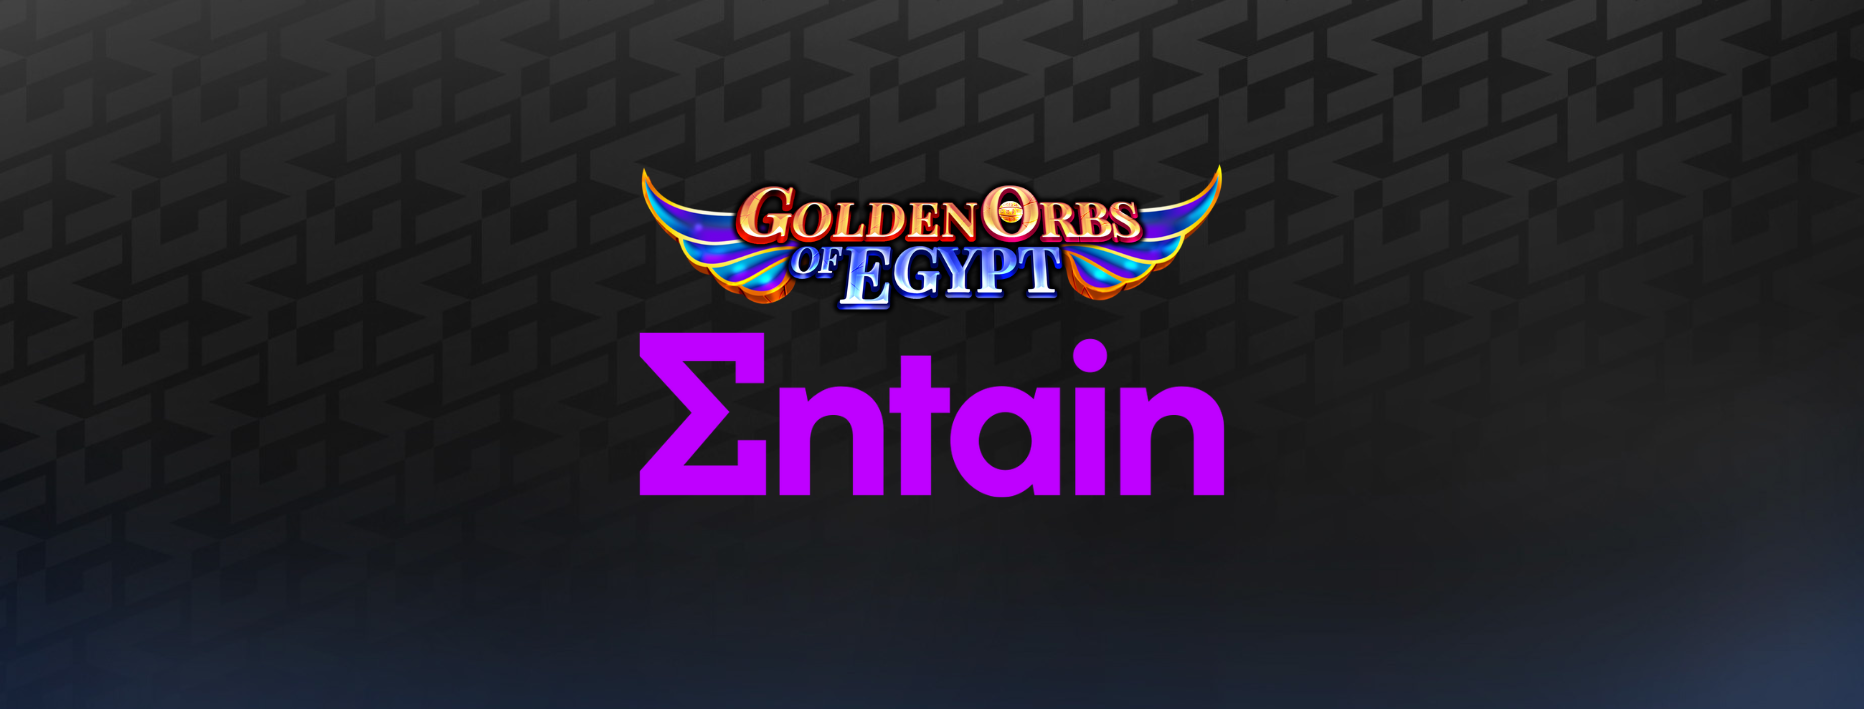 Golden Orbs of Egypt exclusively on Entain